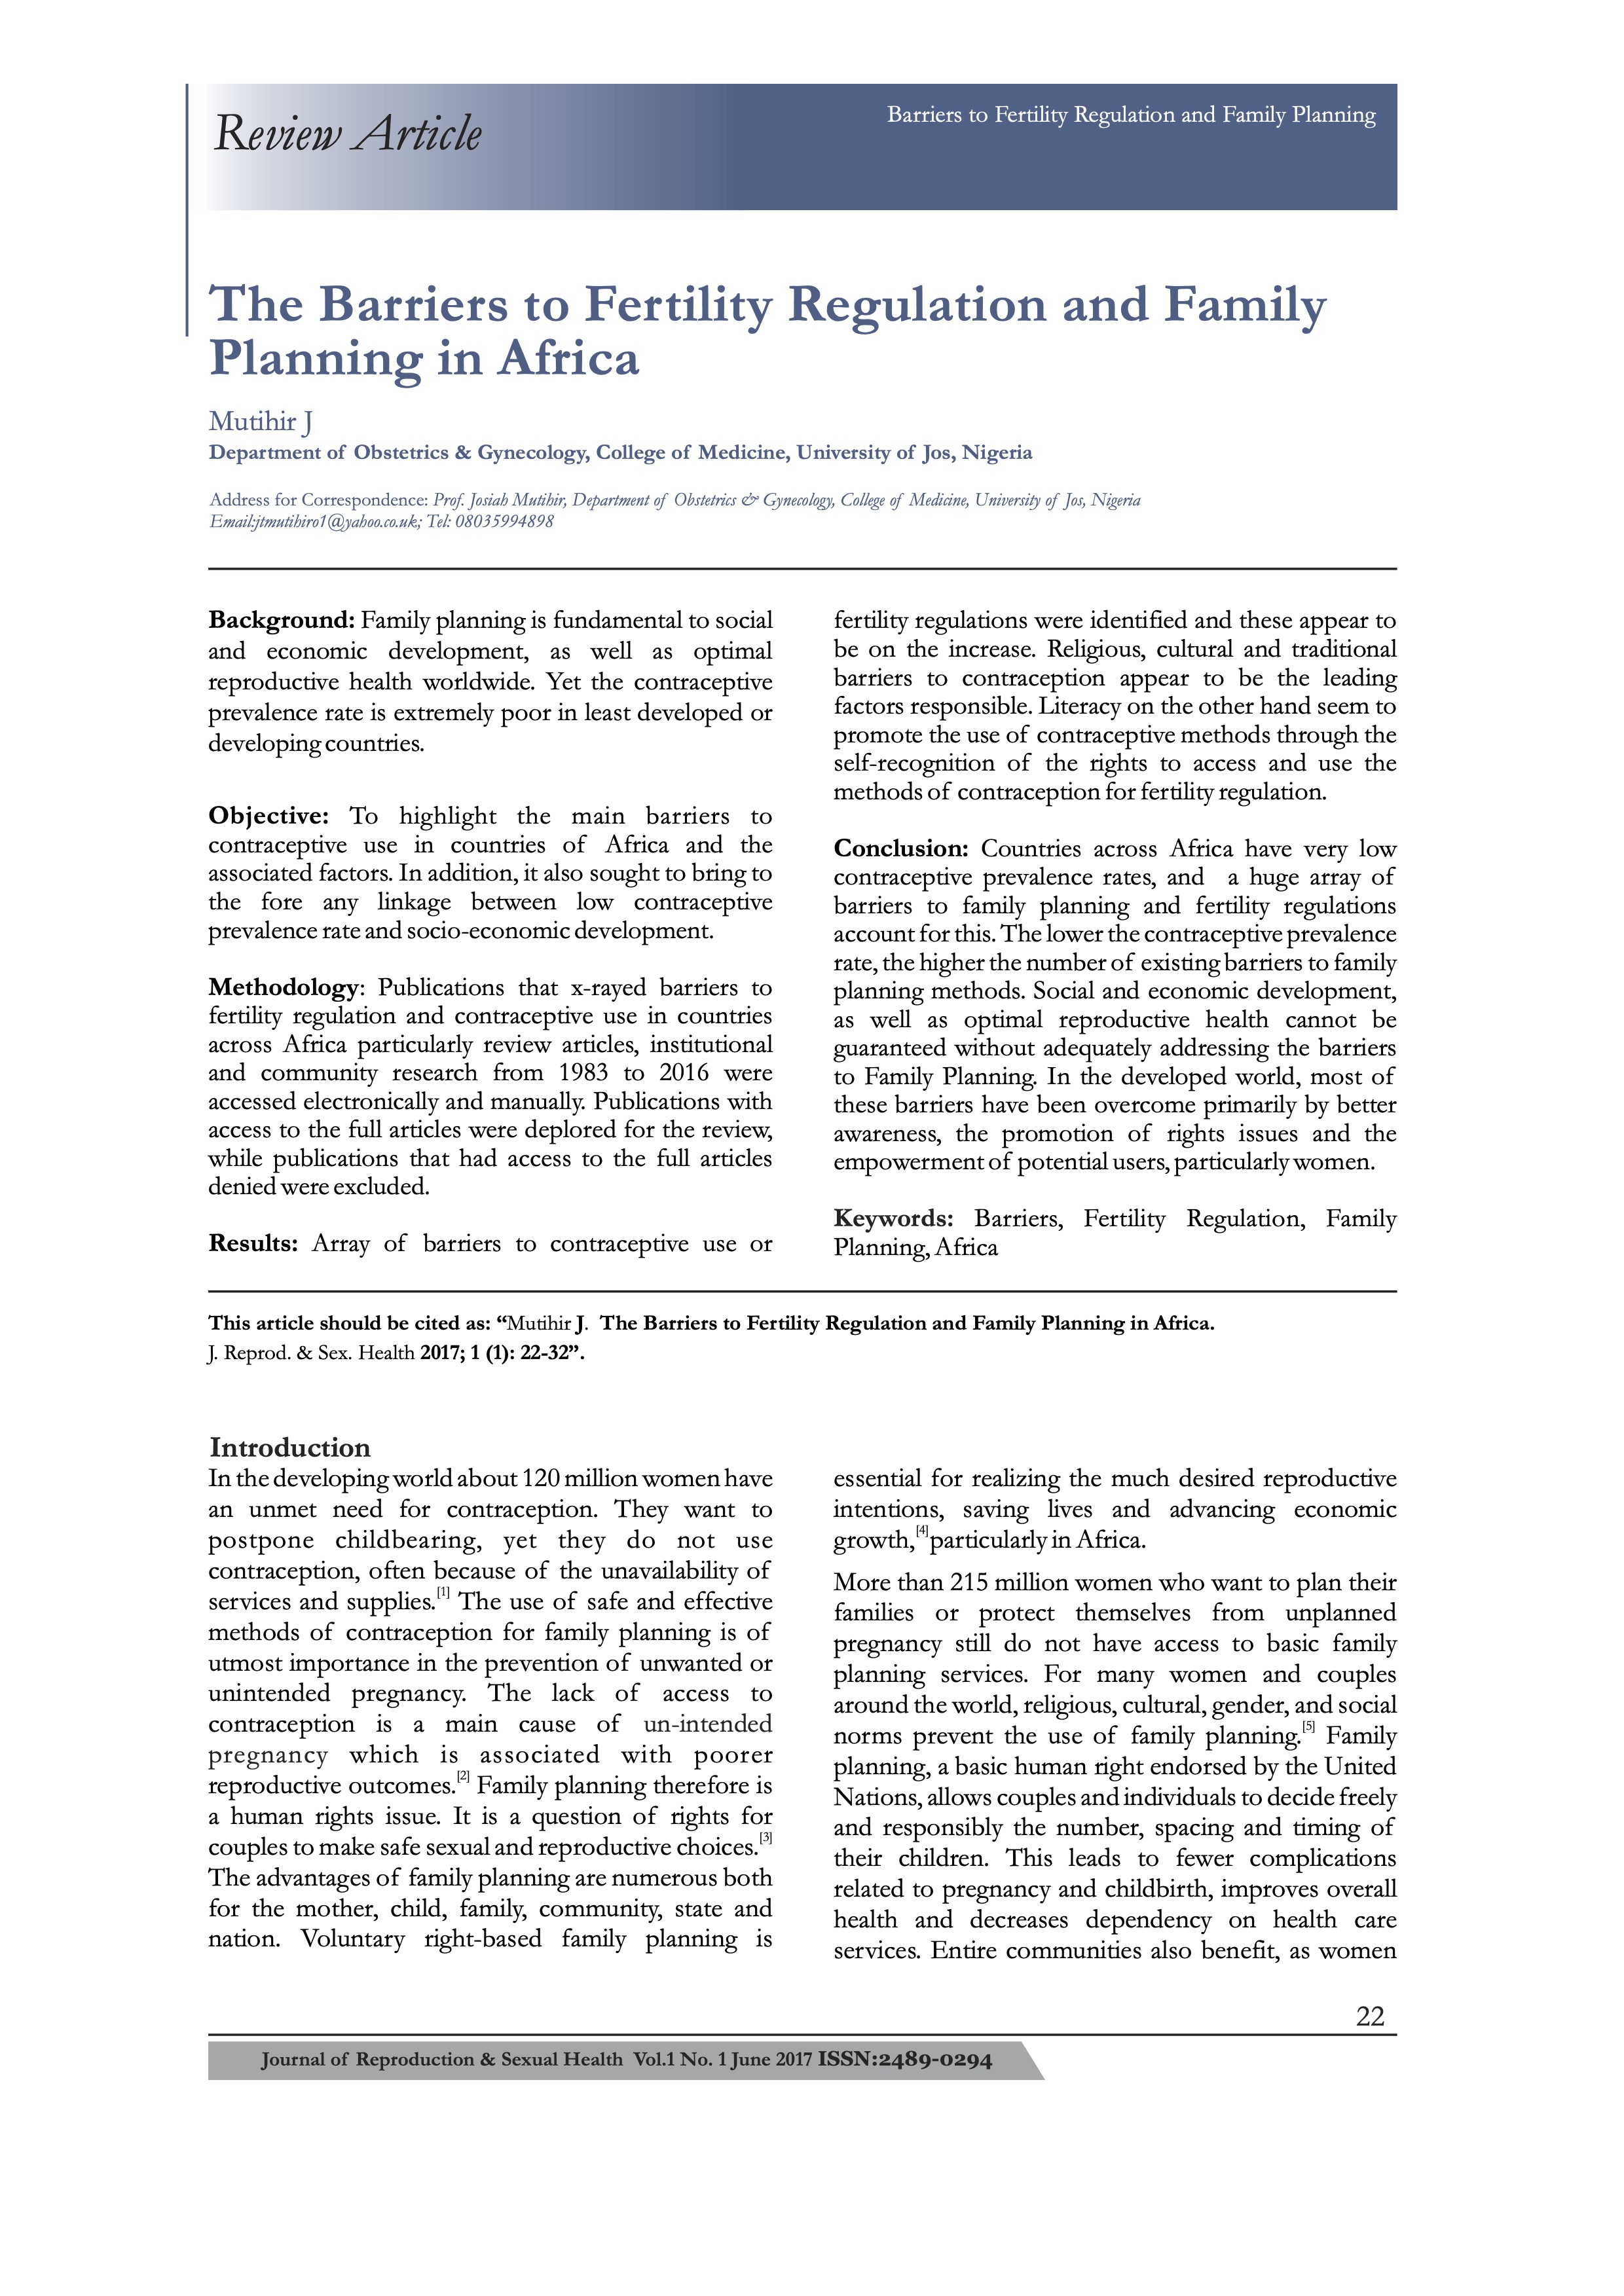 The Barriers to Fertility Regulation and Family Planning in Africa